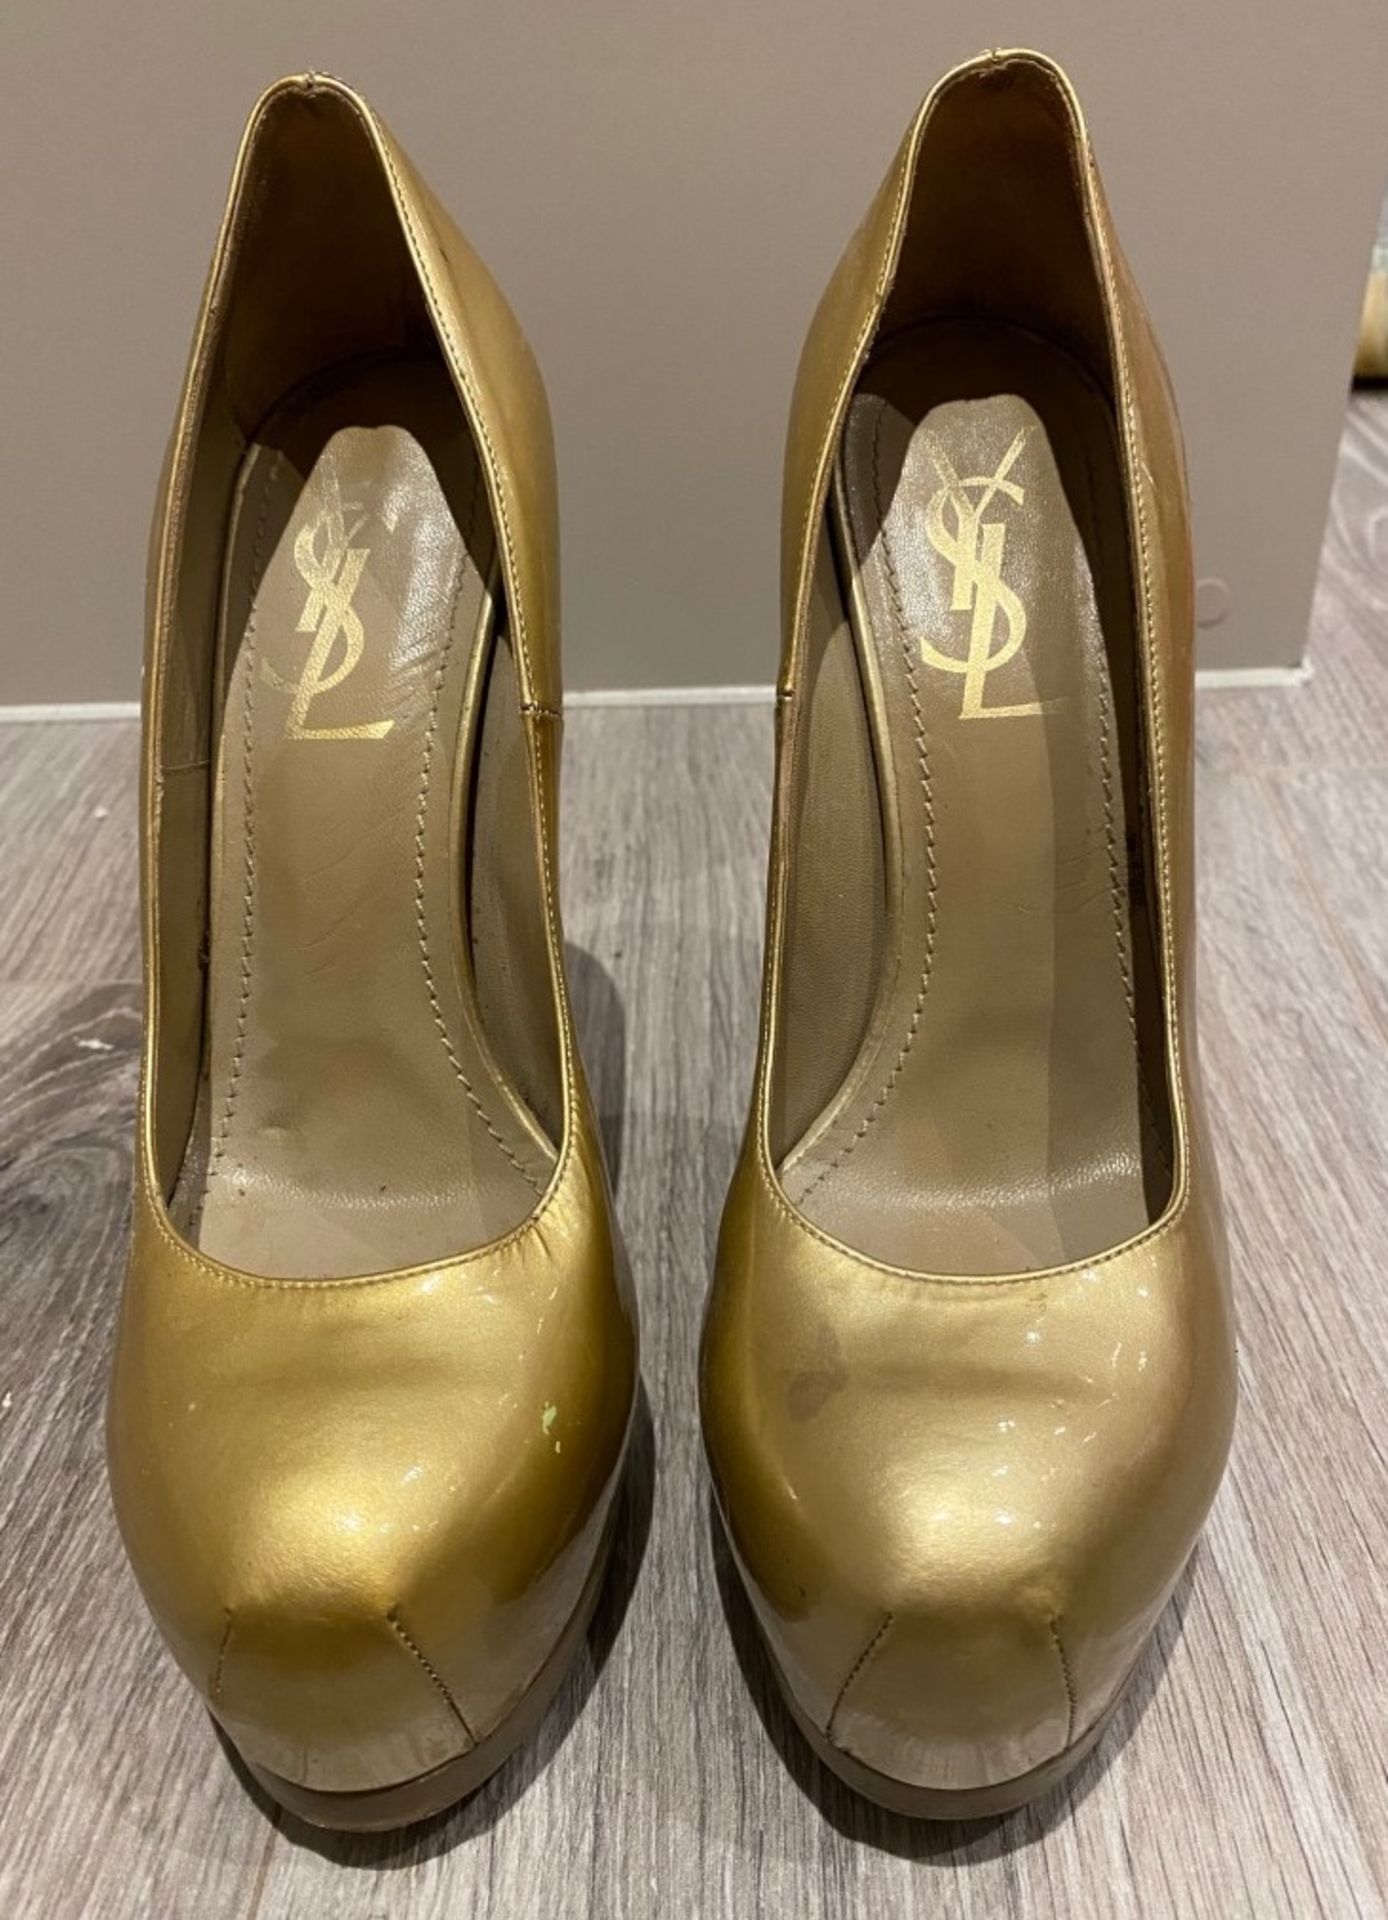 1 x Pair Of Genuine YSL High Heel Shoes In Gold - Size: 36 - Preowned in Worn Condition - Ref: LOT52 - Image 3 of 4